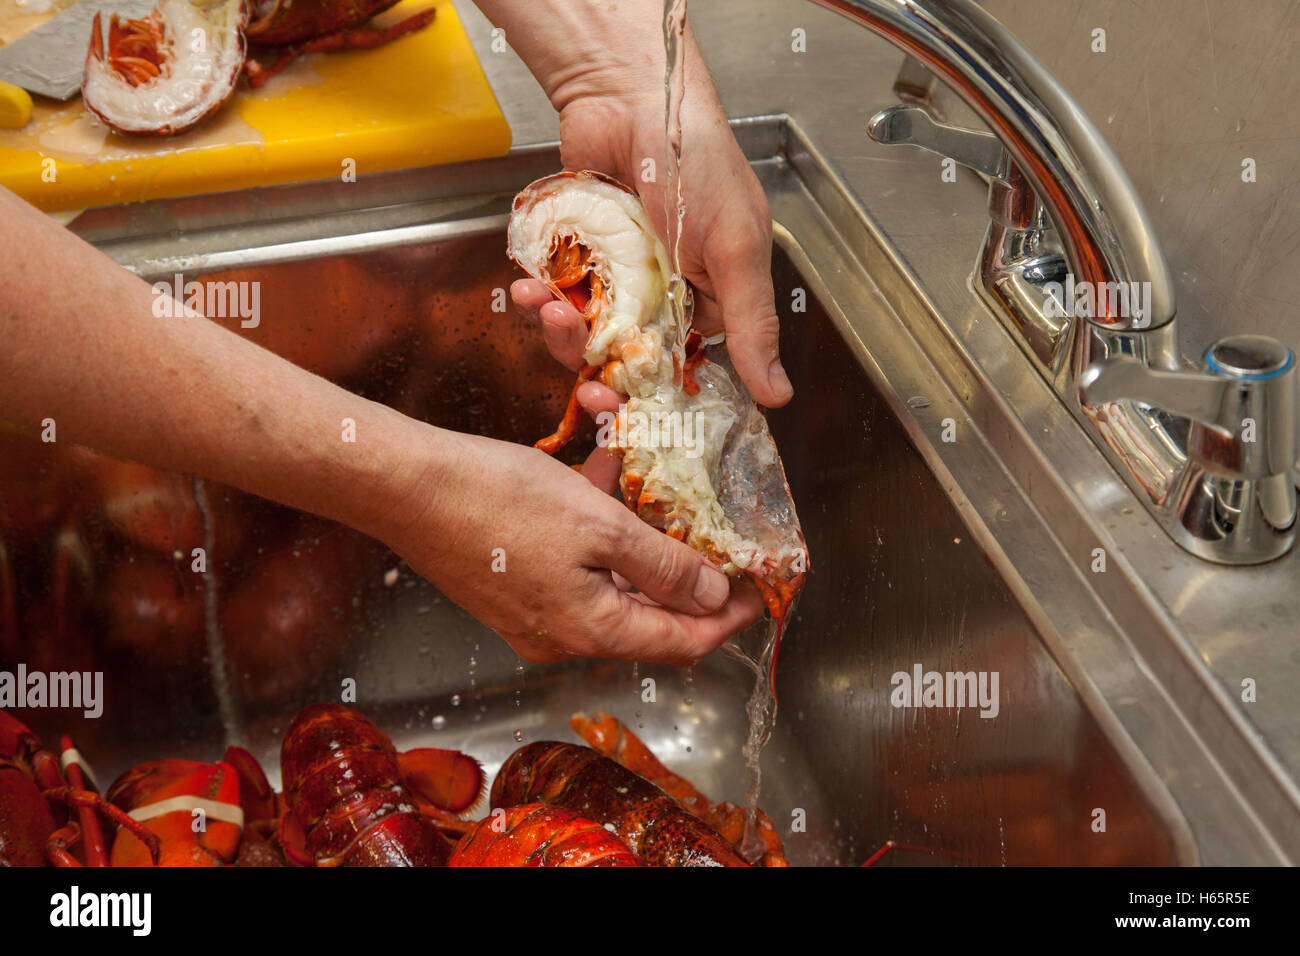 Wasking freshly cooked lobster under a tap in a sink Stock Photo